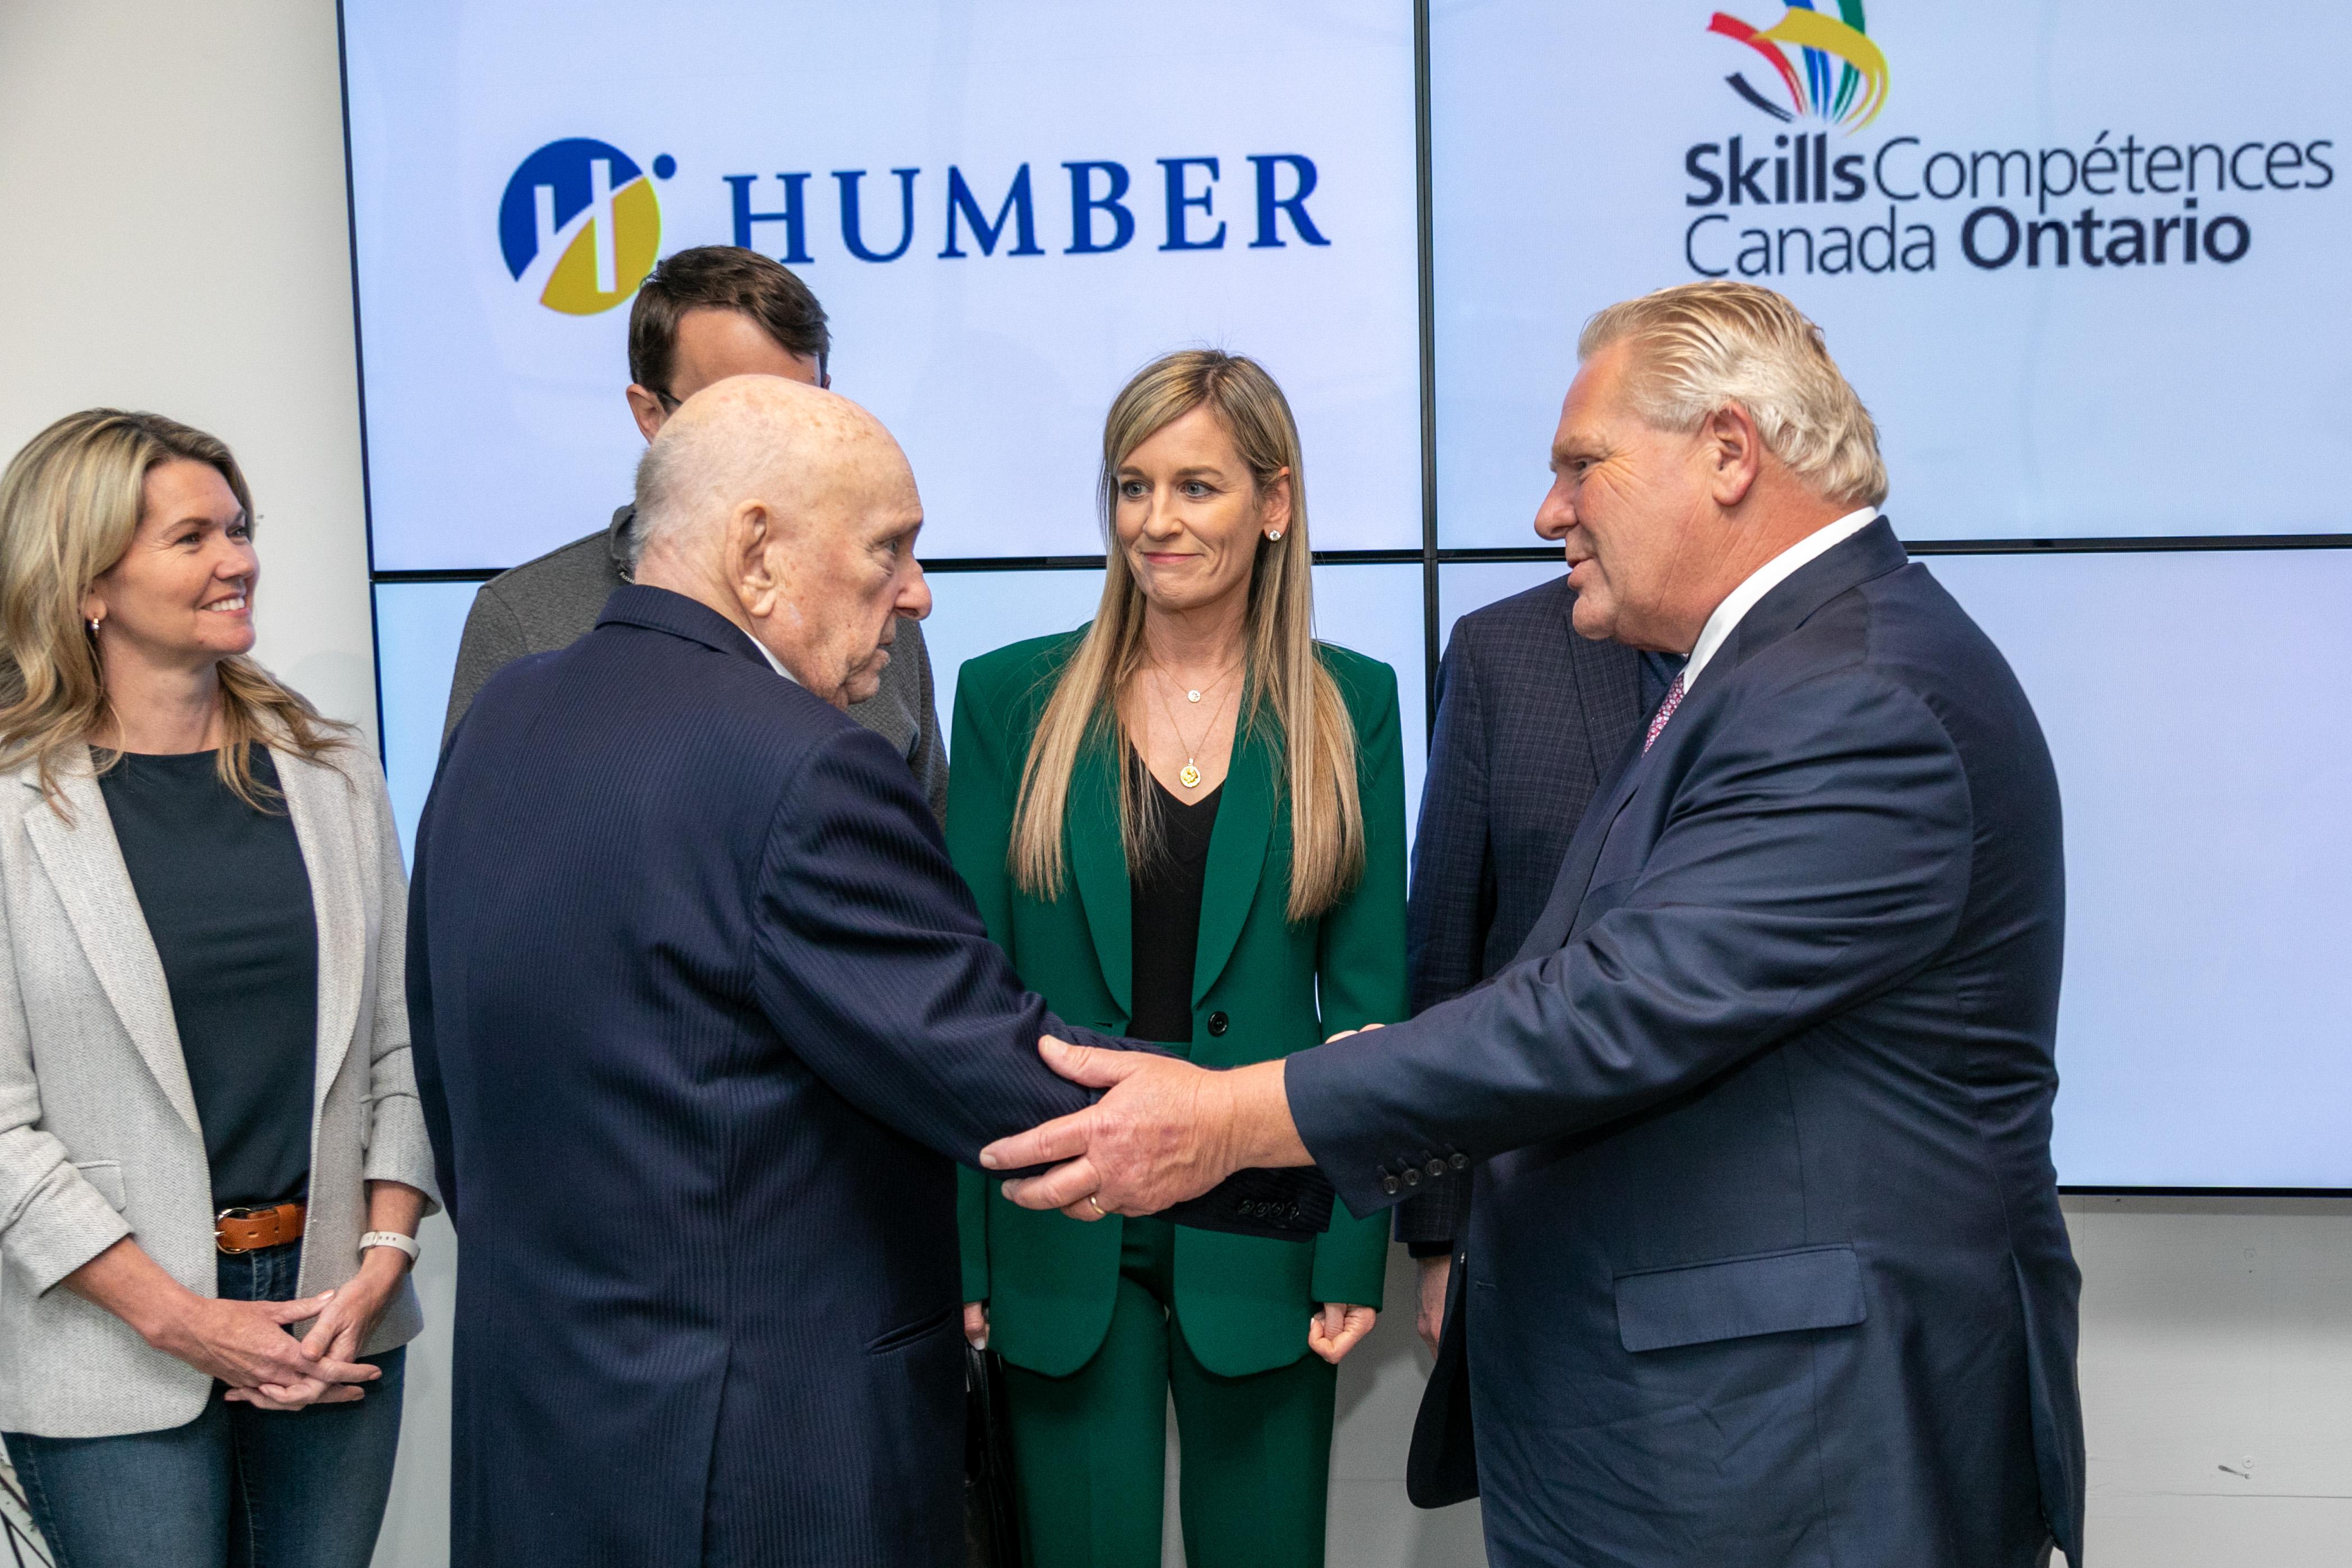 Premier Doug Ford shakes a person’s hand while Judy Schulich and others watch.